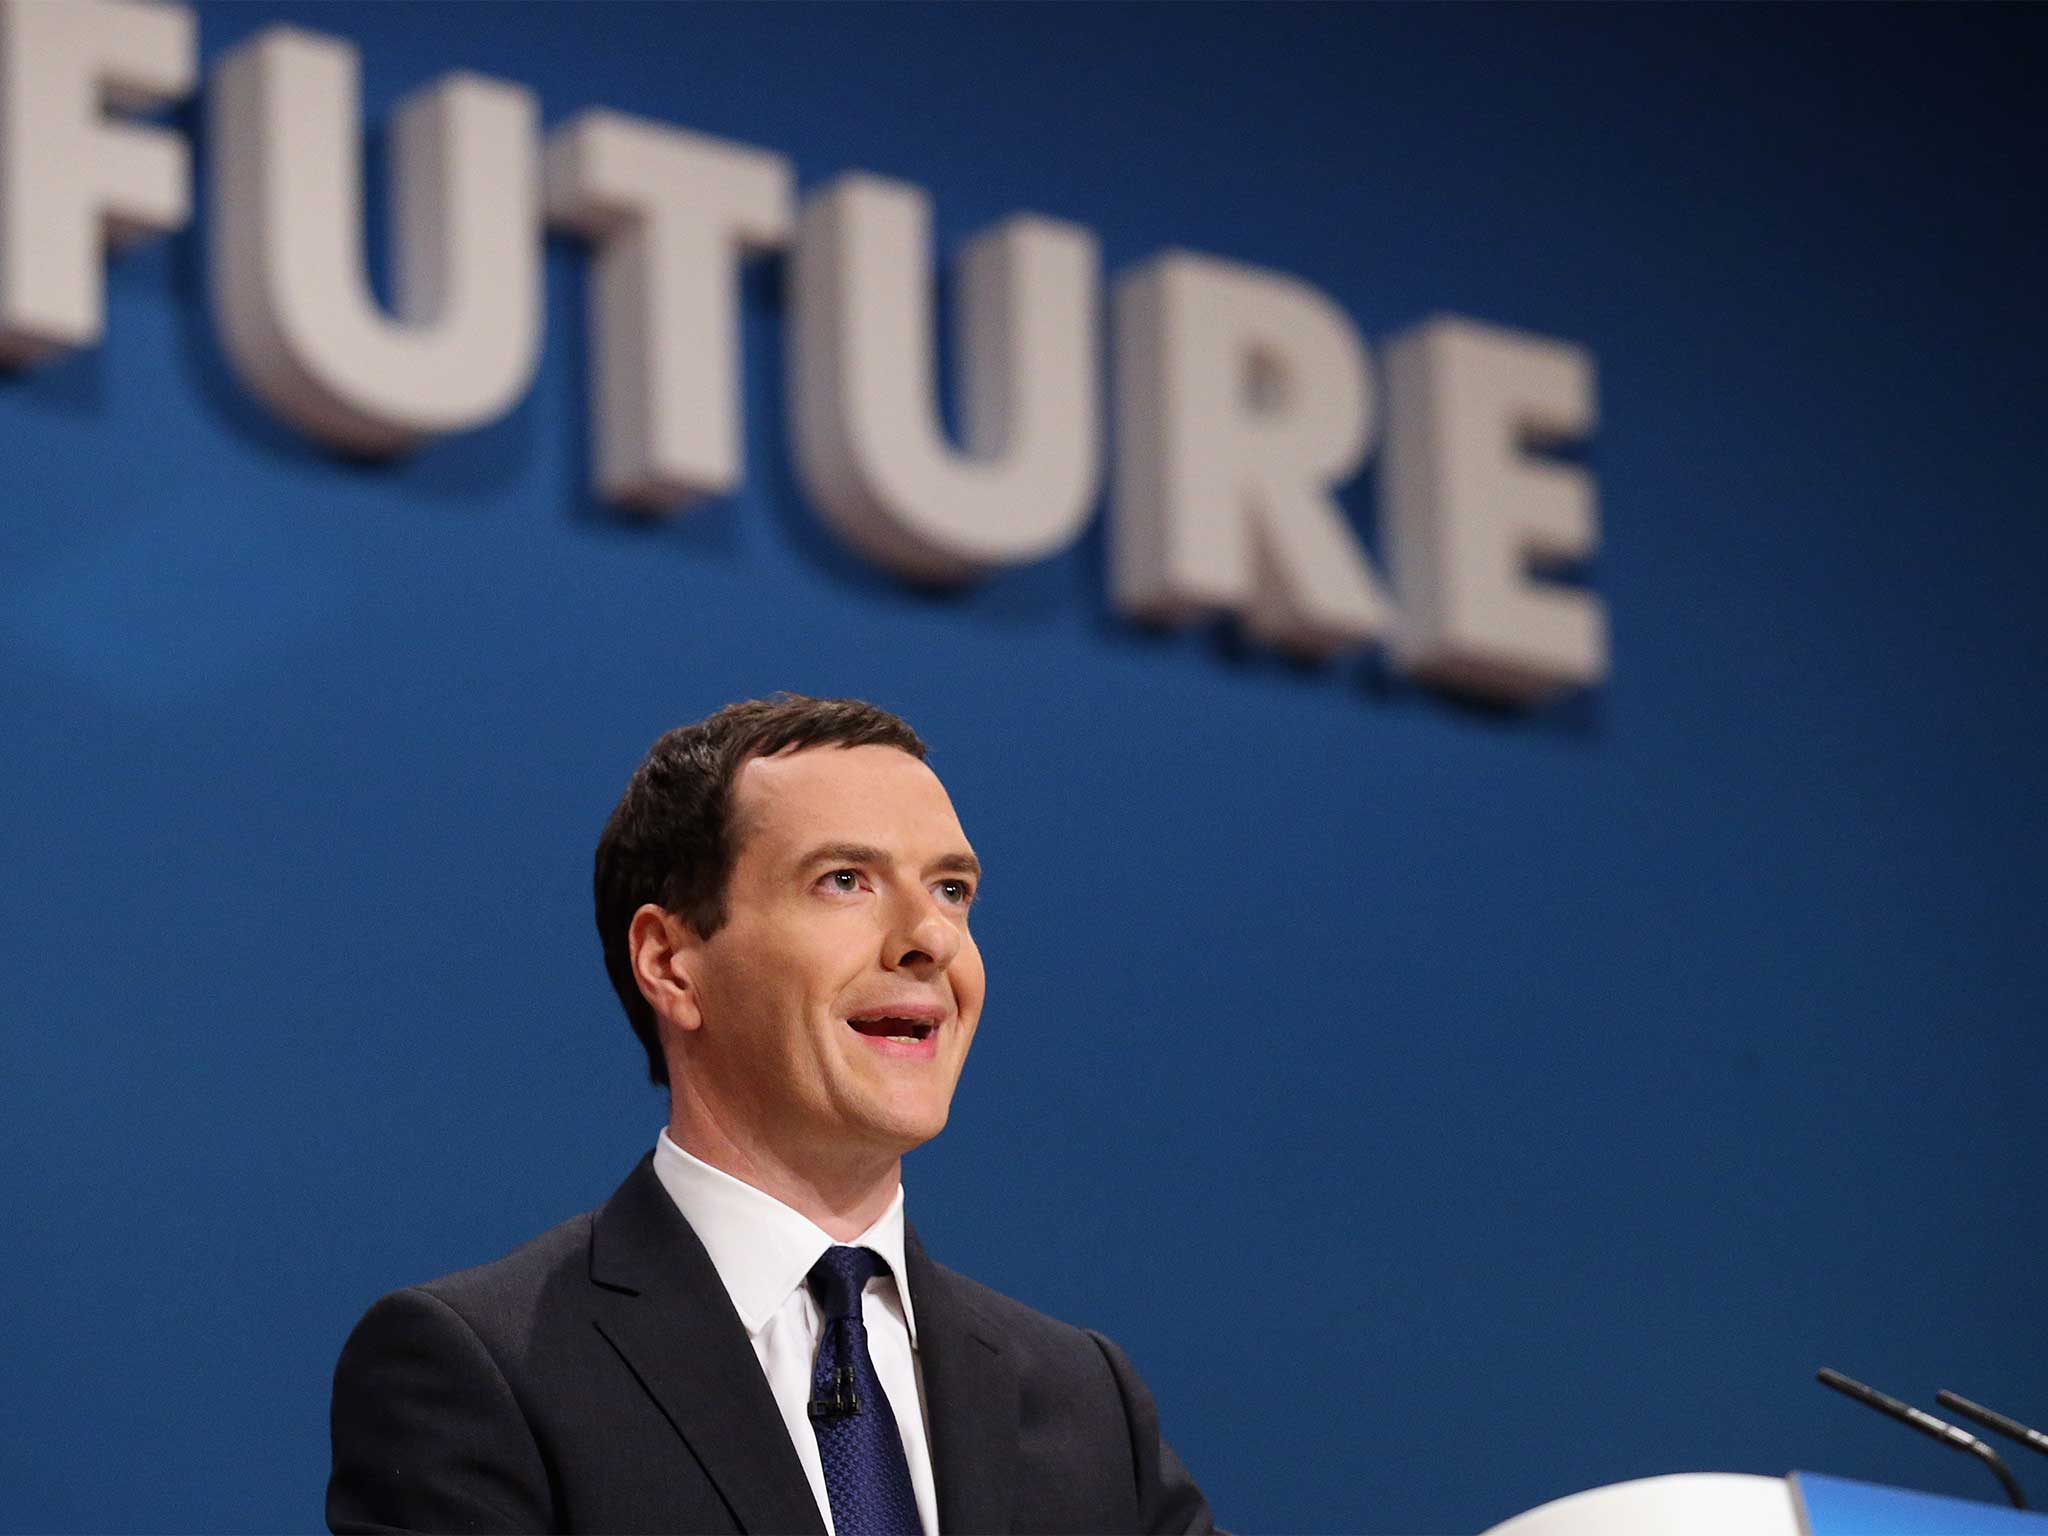 The Chancellor of the Exchequer George Osborne addresses the Conservative party conference